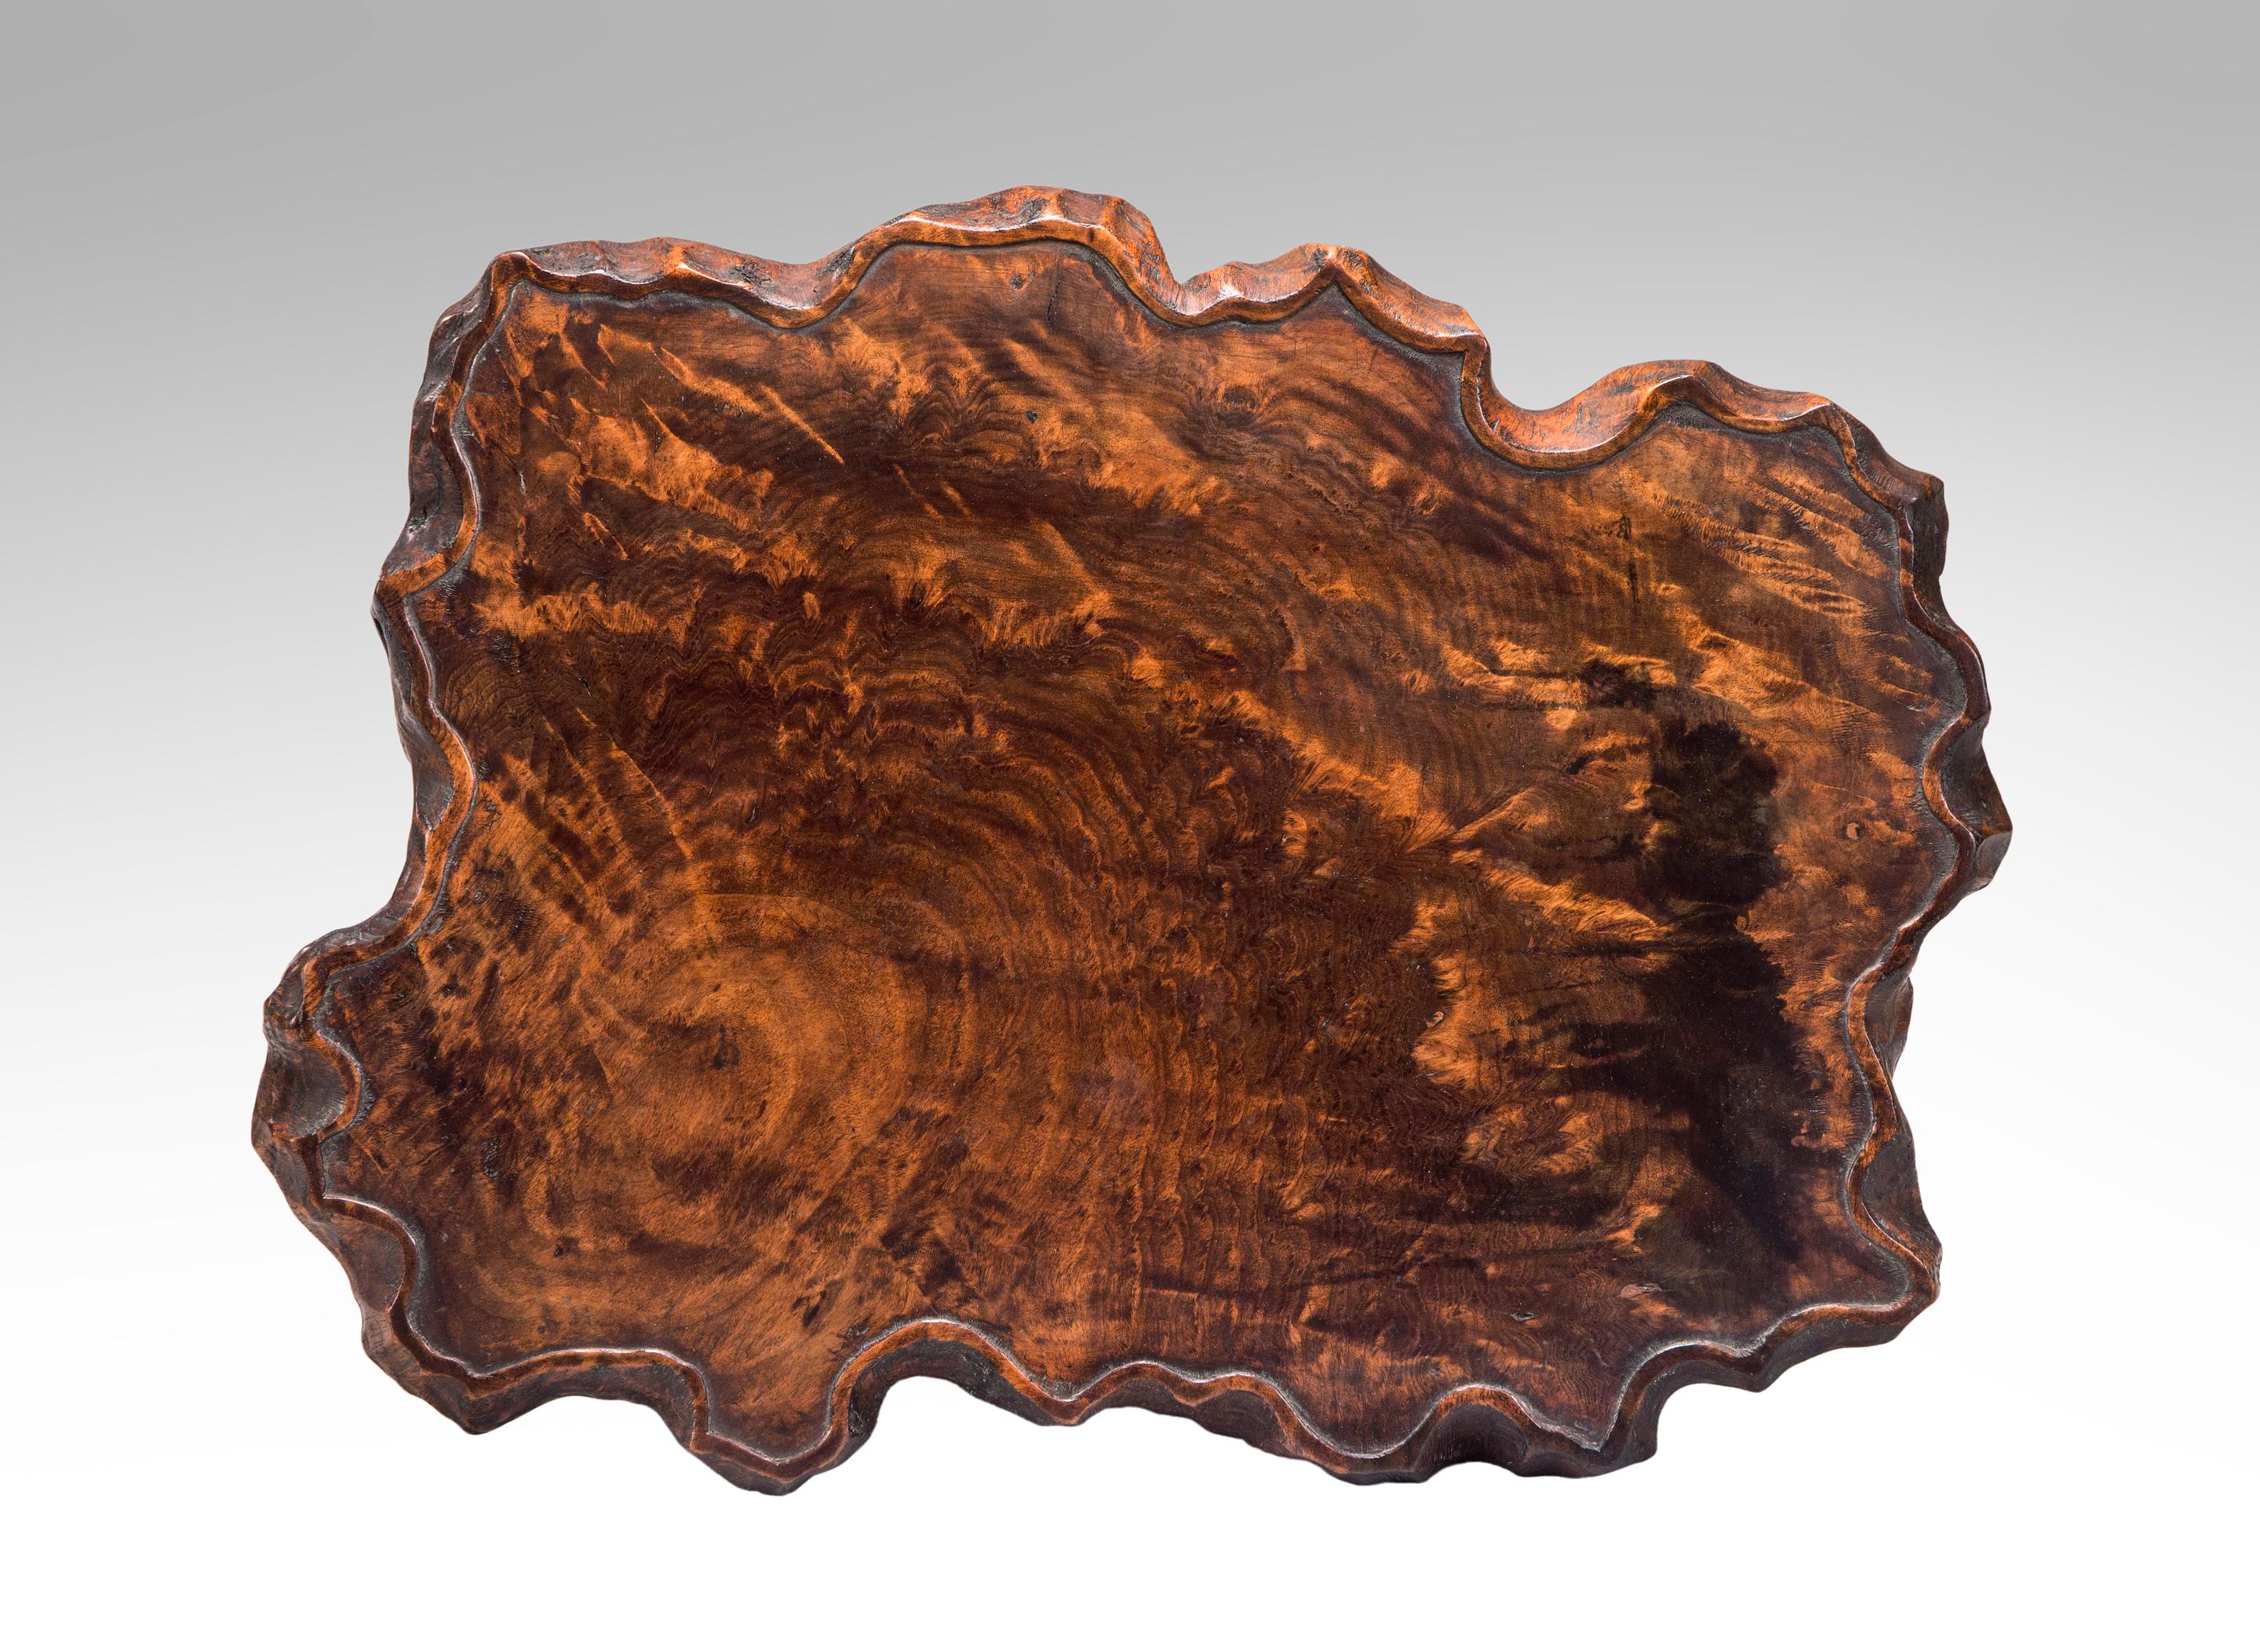 Japanese burl wood tray / stand
19th or early 20th century
This gorgeously figured burl wood tray /stand with a irregular edge adorned by a raised line exemplifies the profound understanding of the beauty of natural materials that Japanese